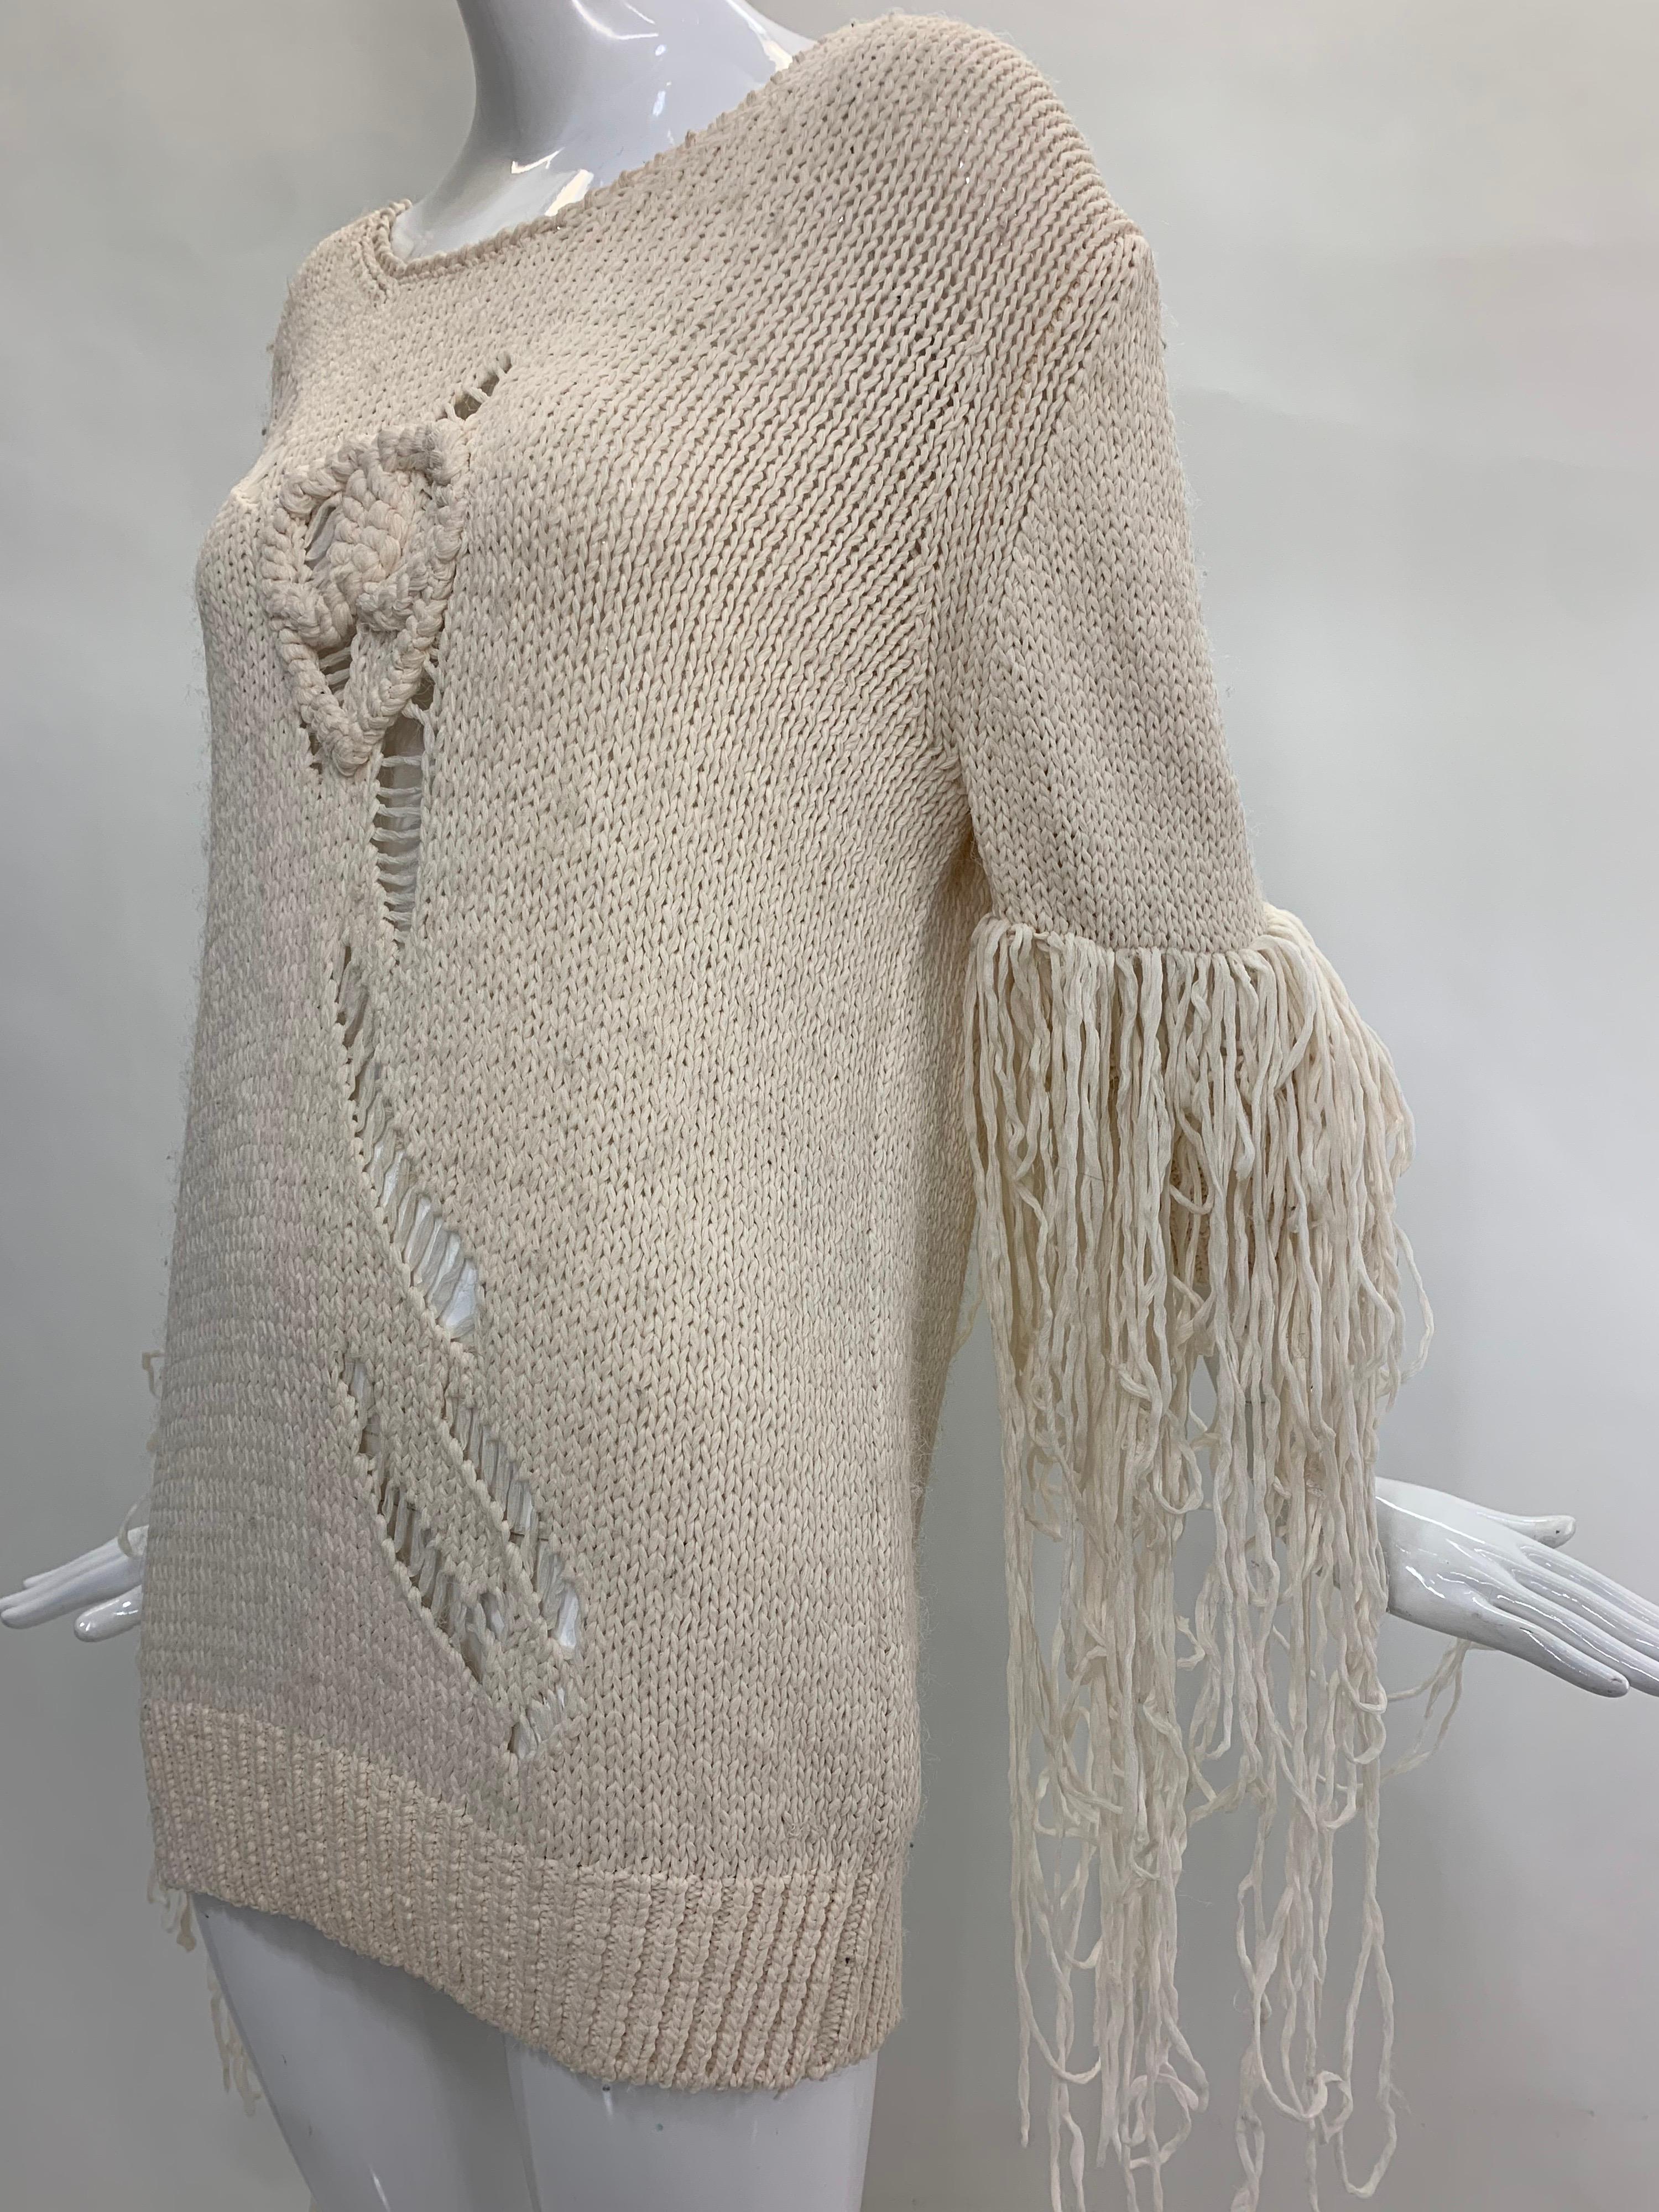 2009 Chanel Cruise Collection cream silk organza knit pullover sweater with 